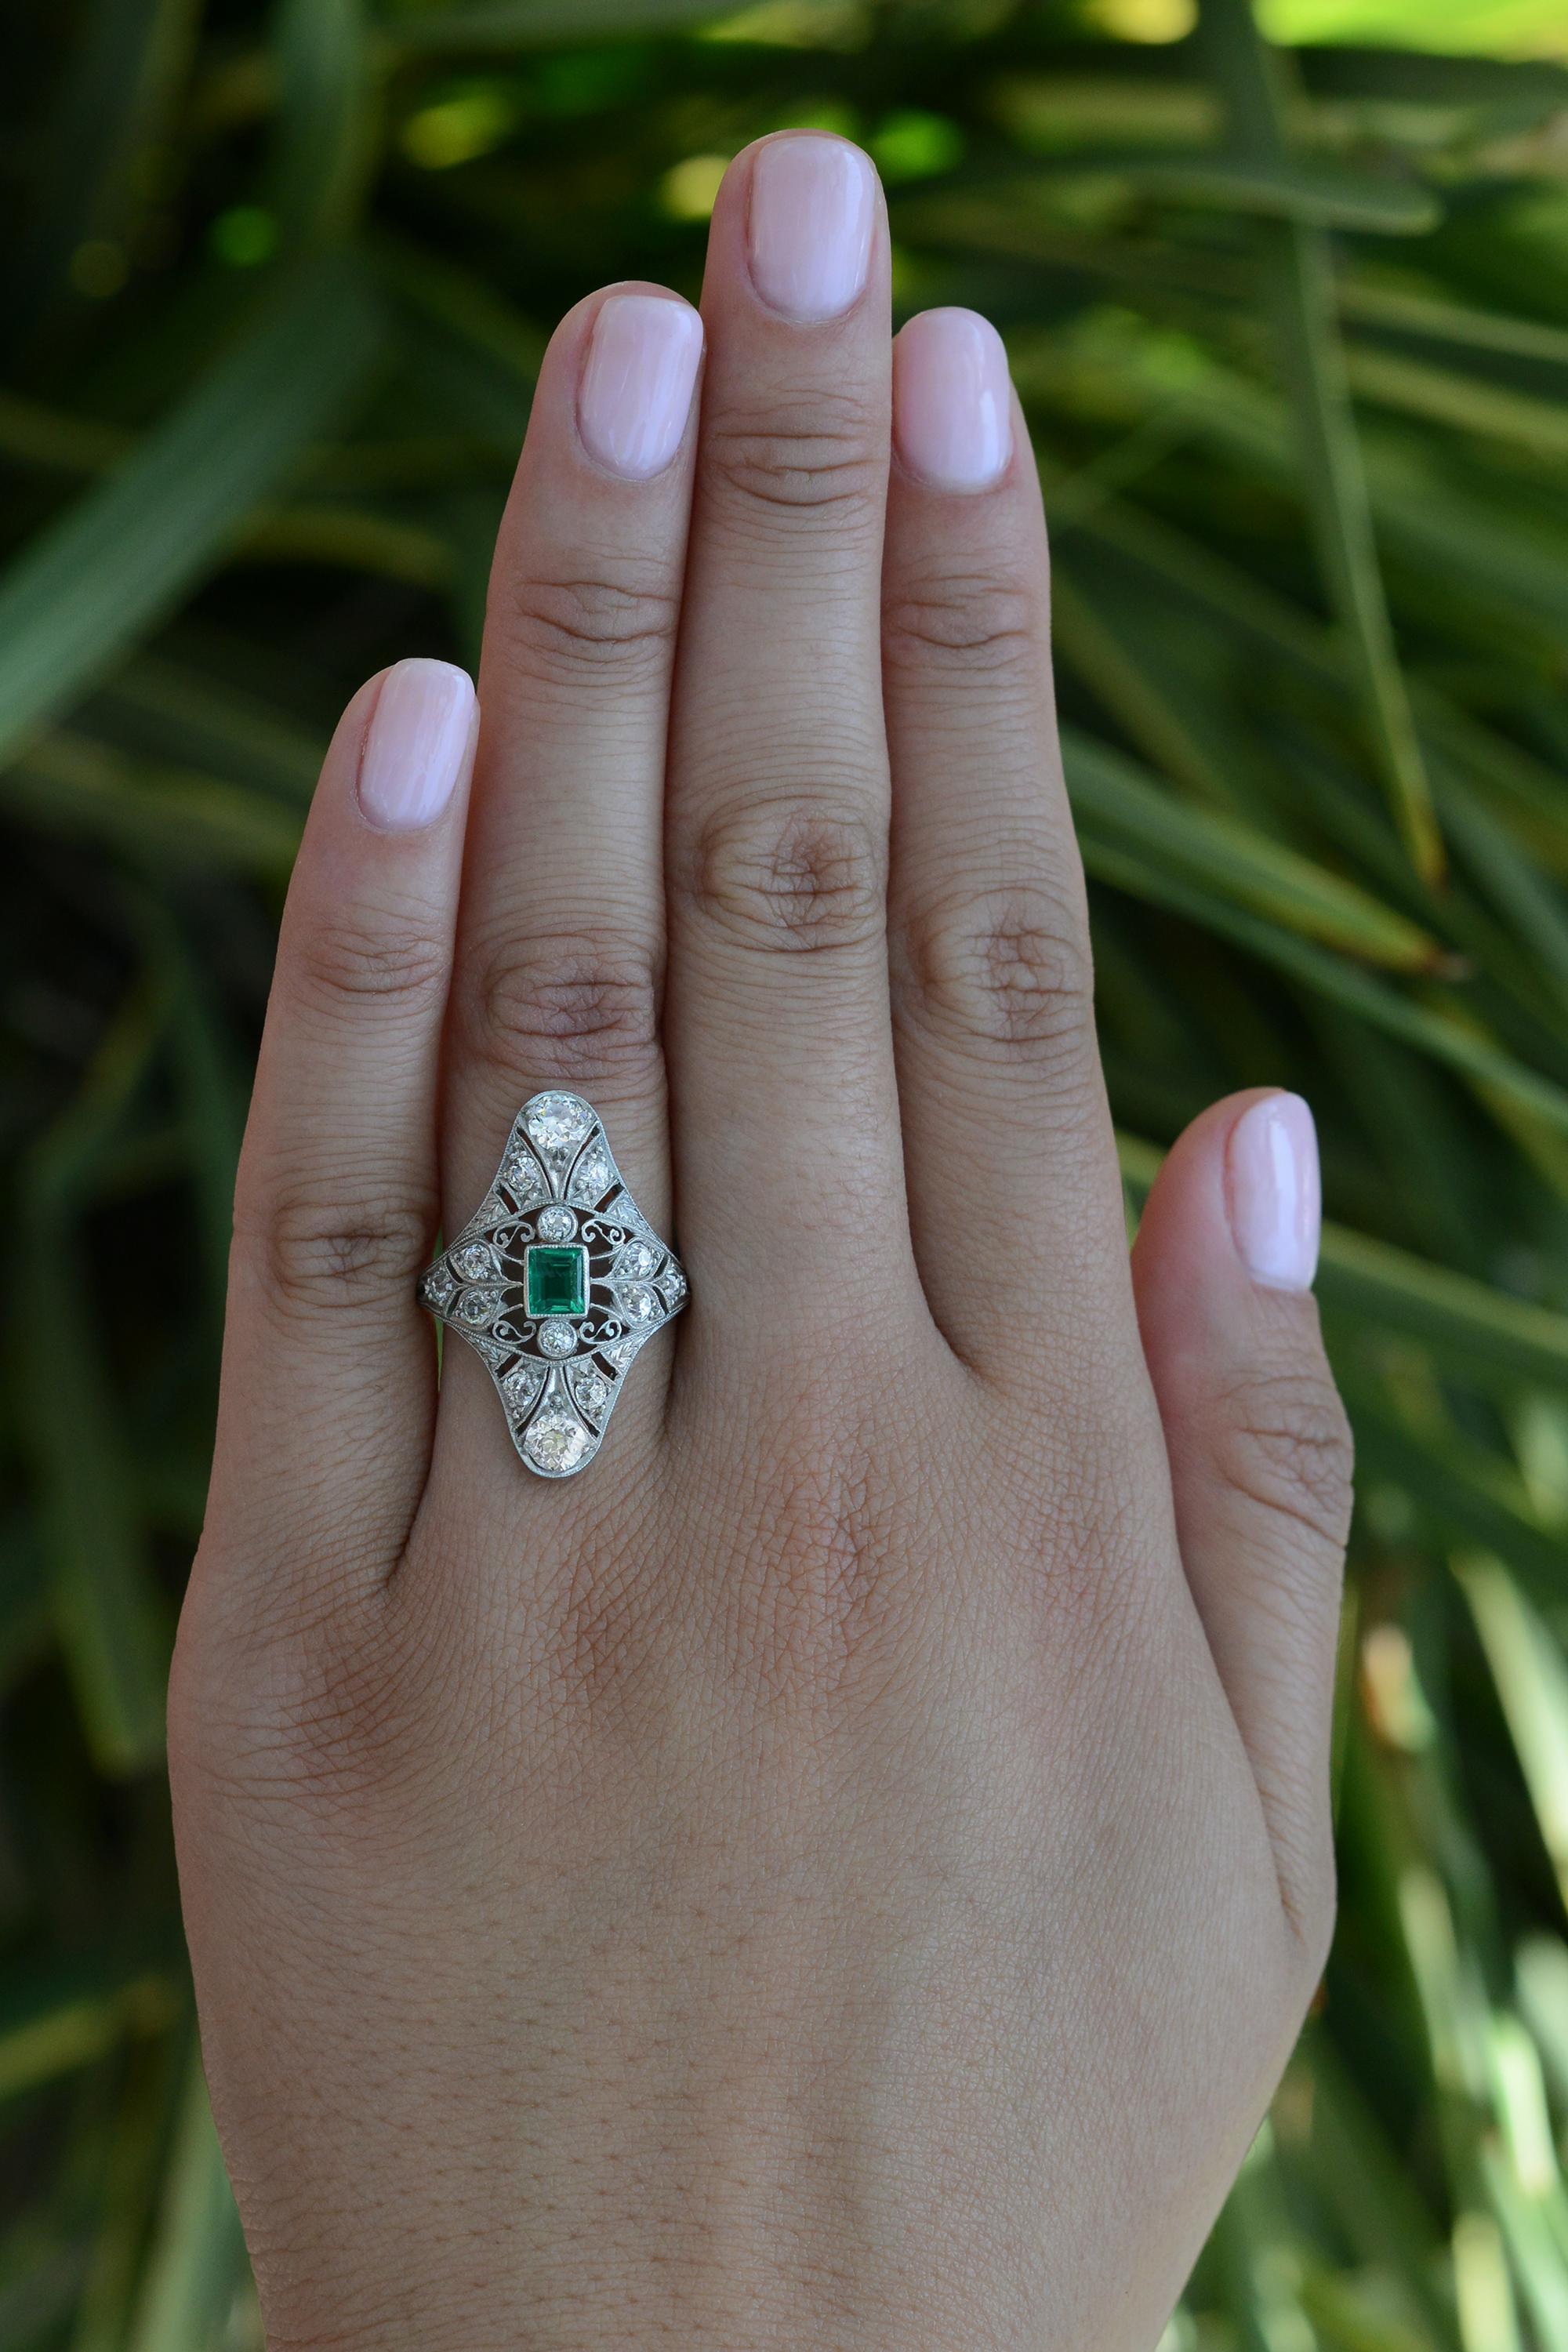 This exquisite emerald and diamond navette dinner ring is an authentic Edwardian statement piece that is sure to become a treasured heirloom. Centering on a vivid, lush medium grass-green emerald with 14 old European and old mine cut diamonds